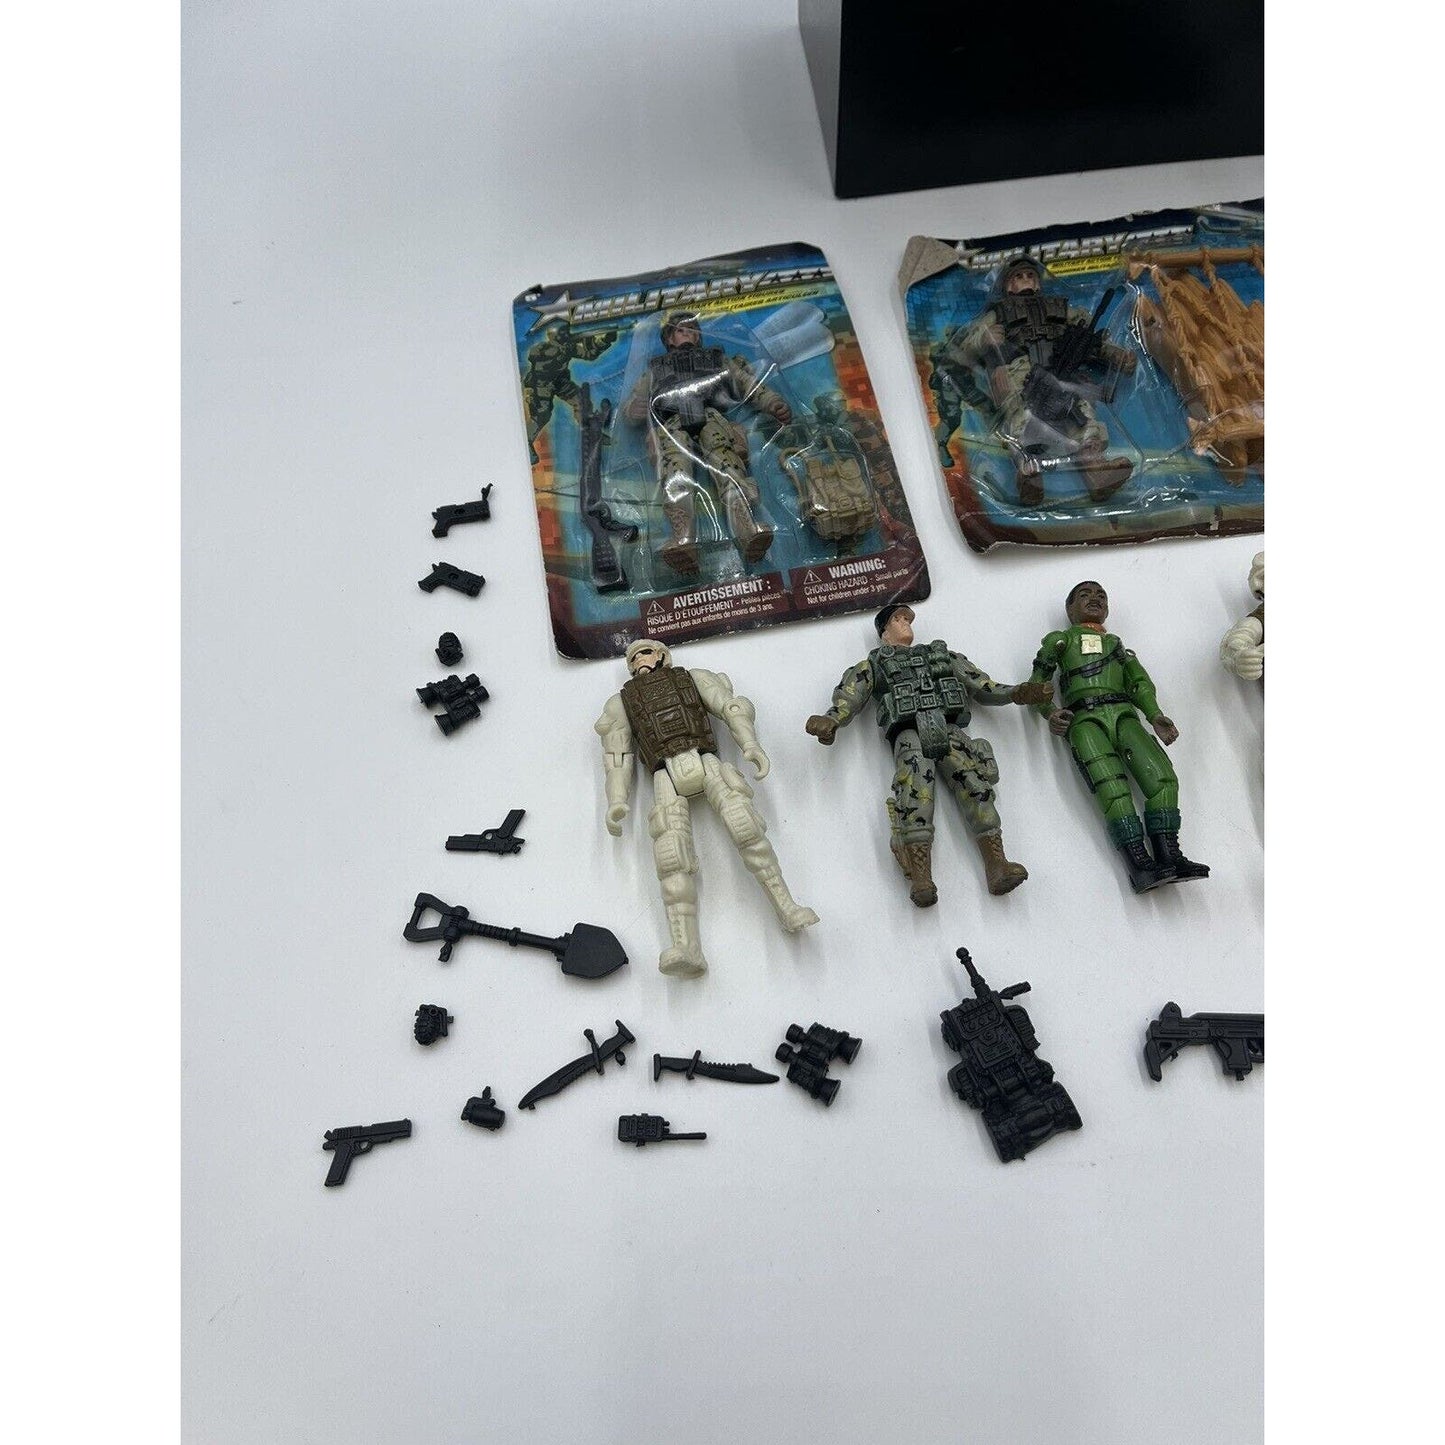 LOT OF Vintage Chap Mei 4" Soldiers Action Figures, Weapons, Vehicle & More